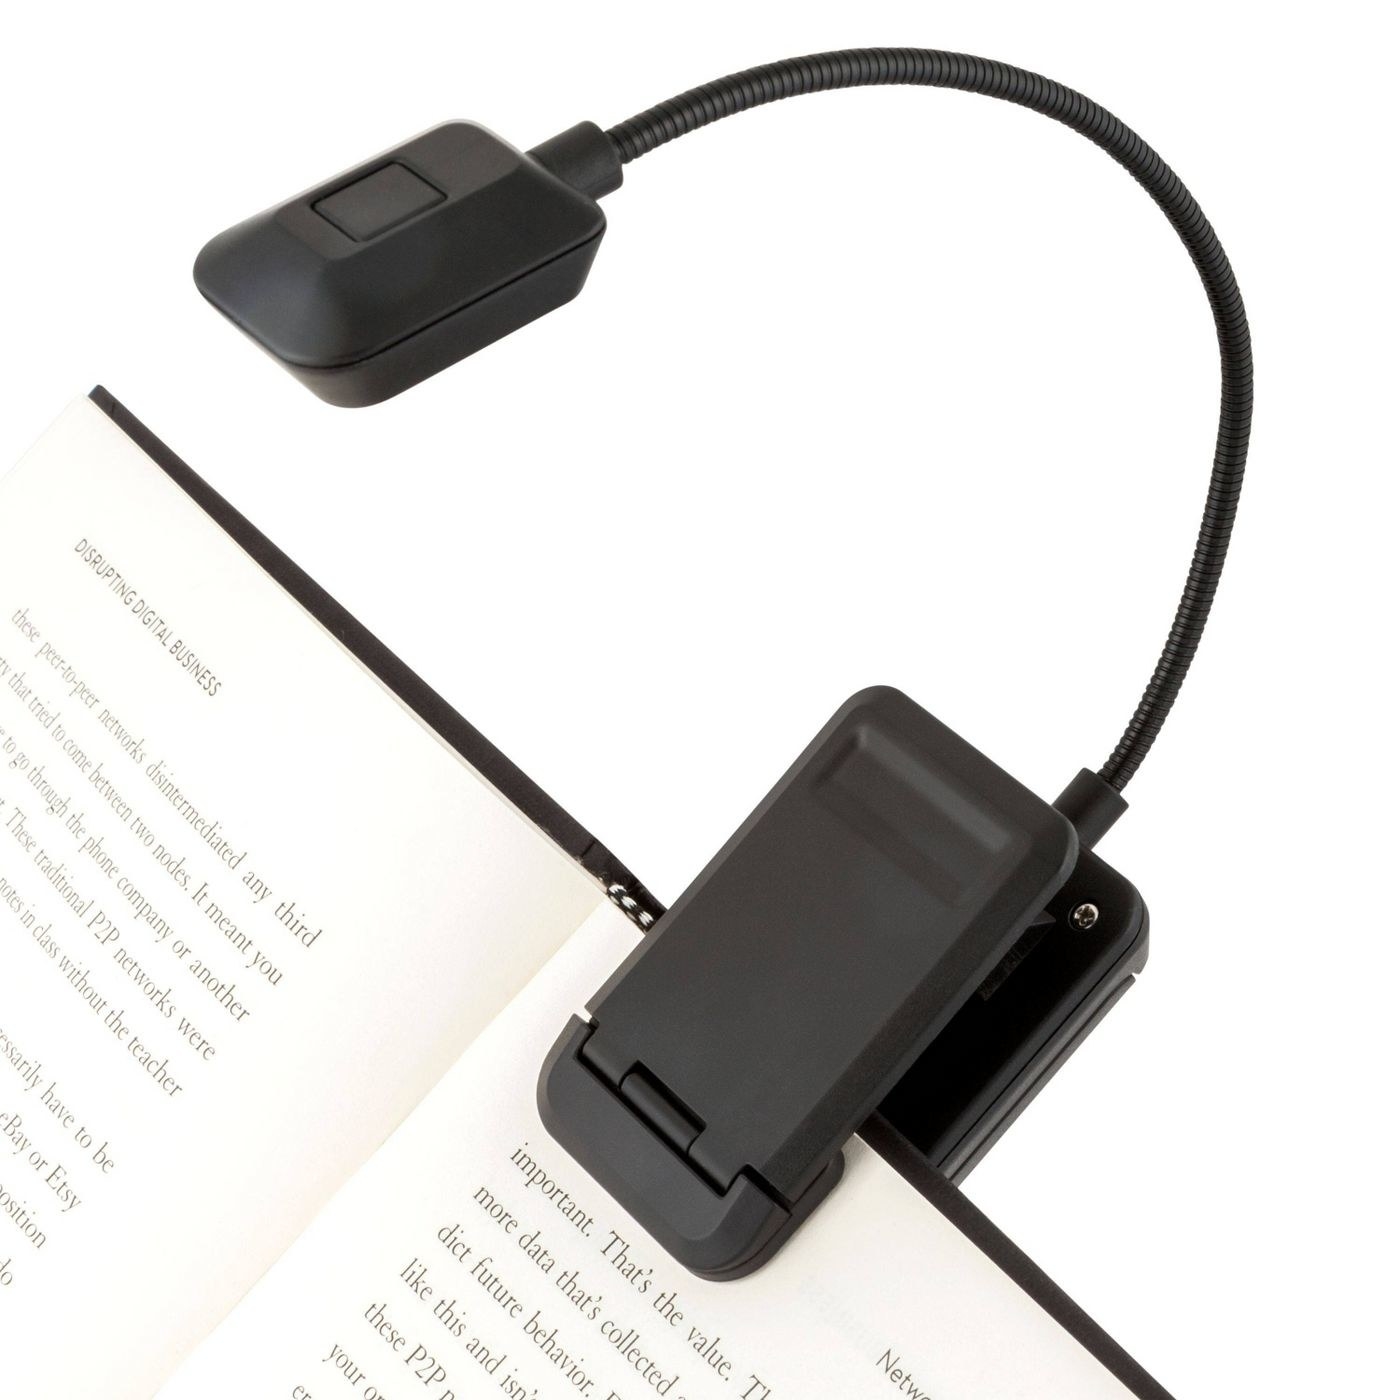 The LED clip-on book reading light